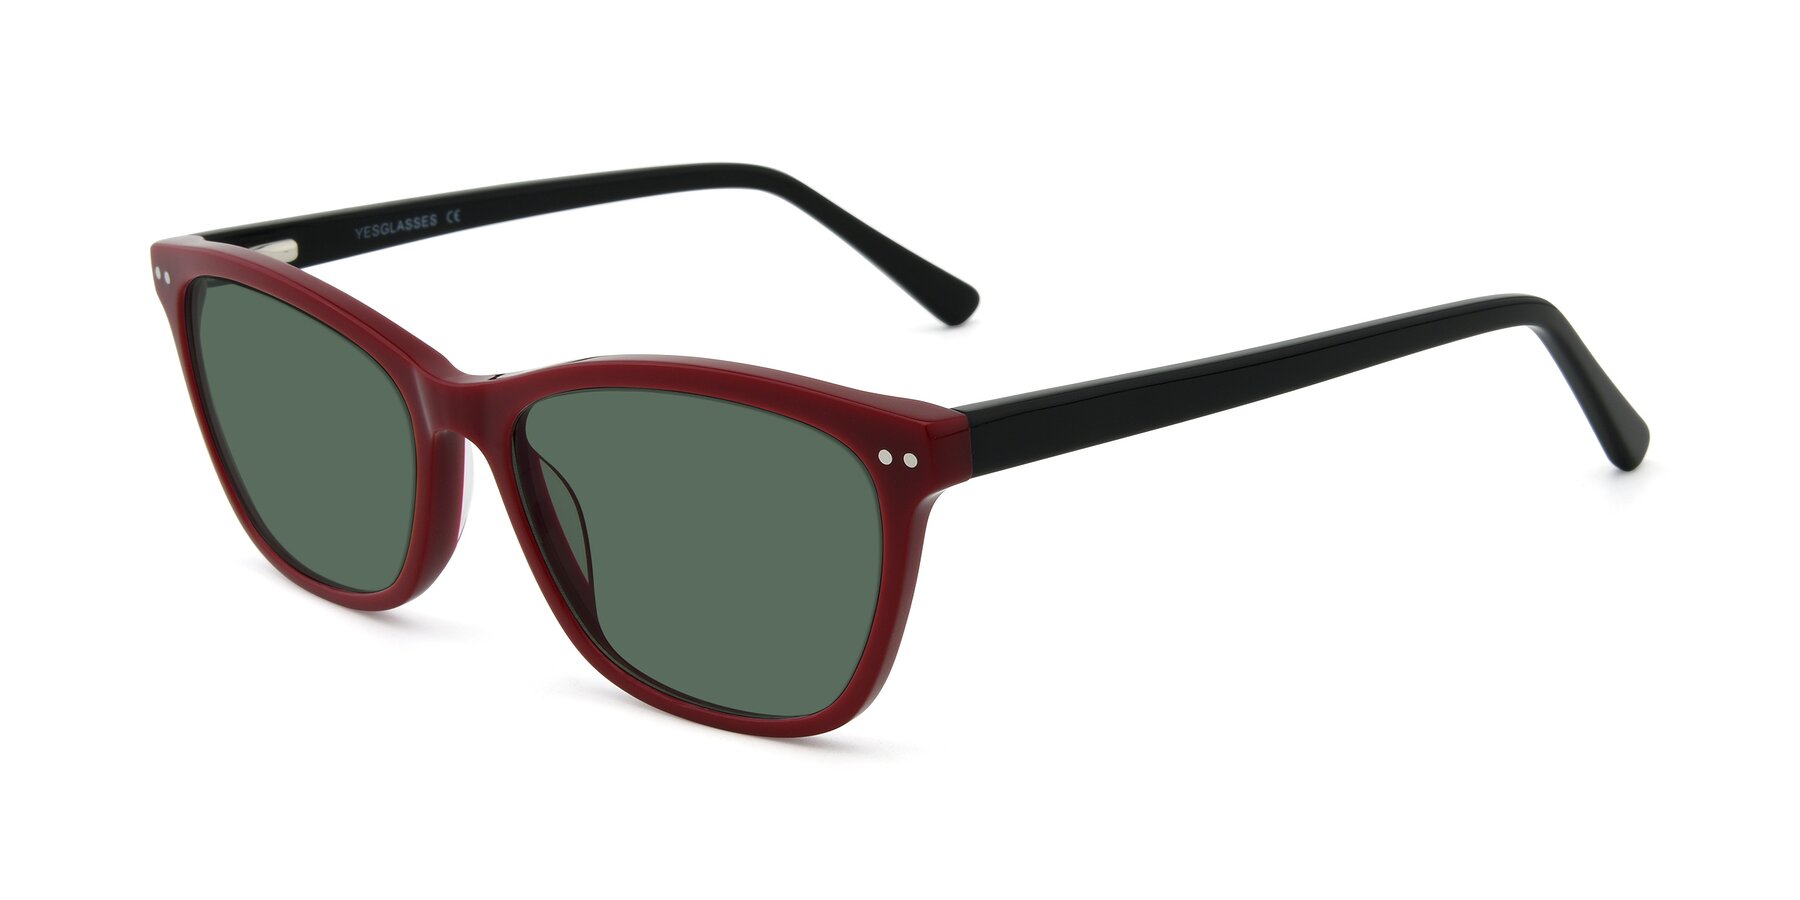 Angle of 17350 in Wine with Green Polarized Lenses